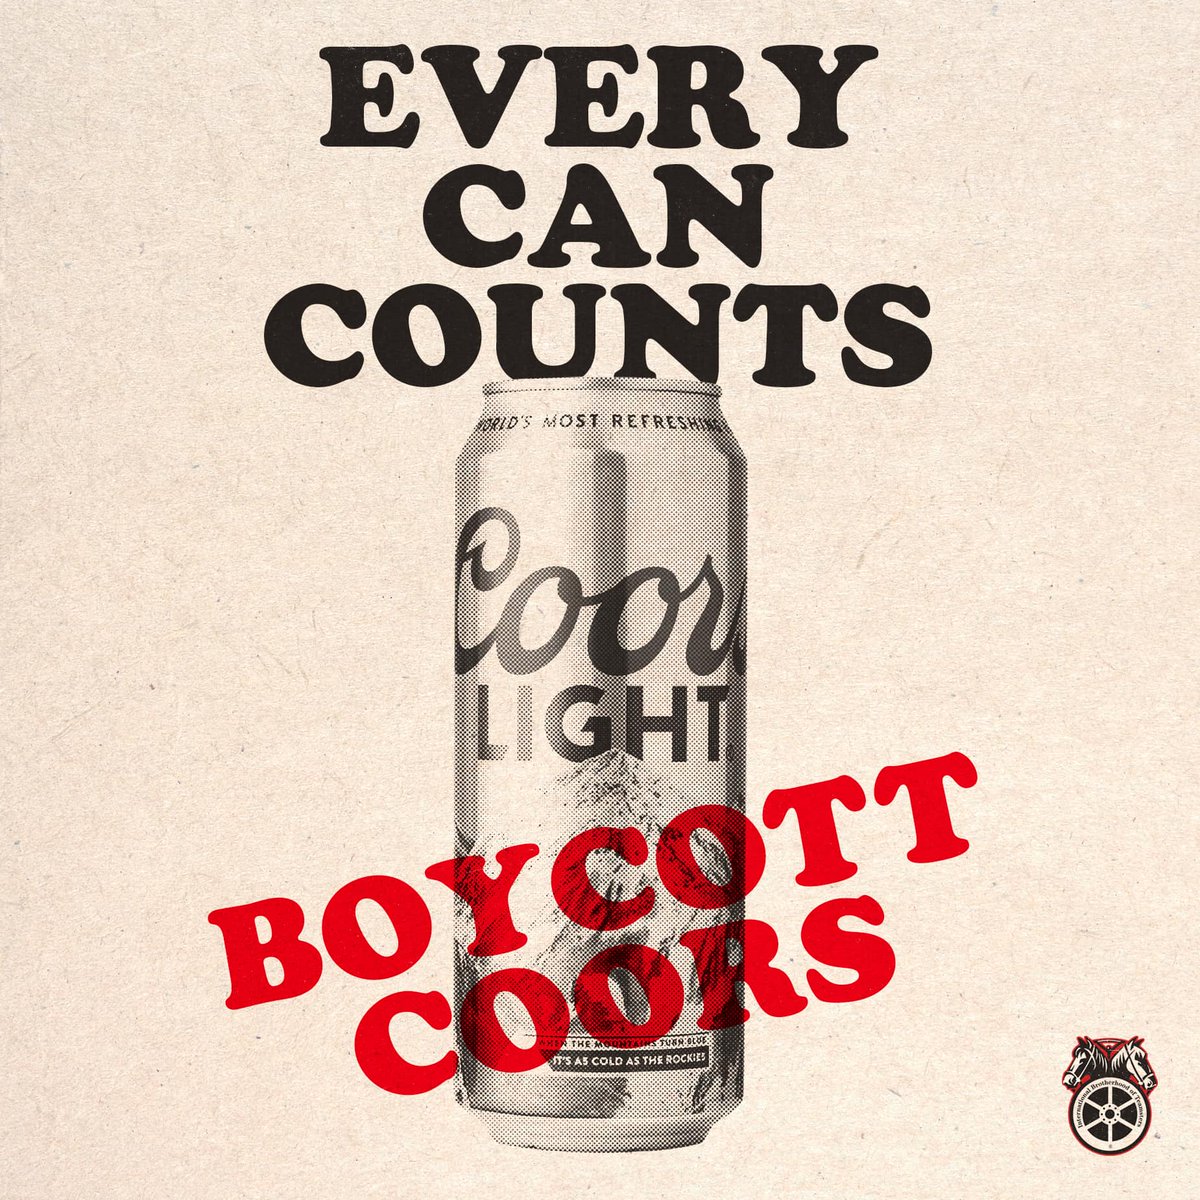 DON’T DRINK MOLSON COORS! 🚫🍻 Forget cracking open a cold one and turn up the heat on corporate greed! Send a message to @MolsonCoors that you won't drink one drop of their beer until a fair deal is reached for Texas #Teamsters. Don’t buy it. Don’t drink it. Every can counts!